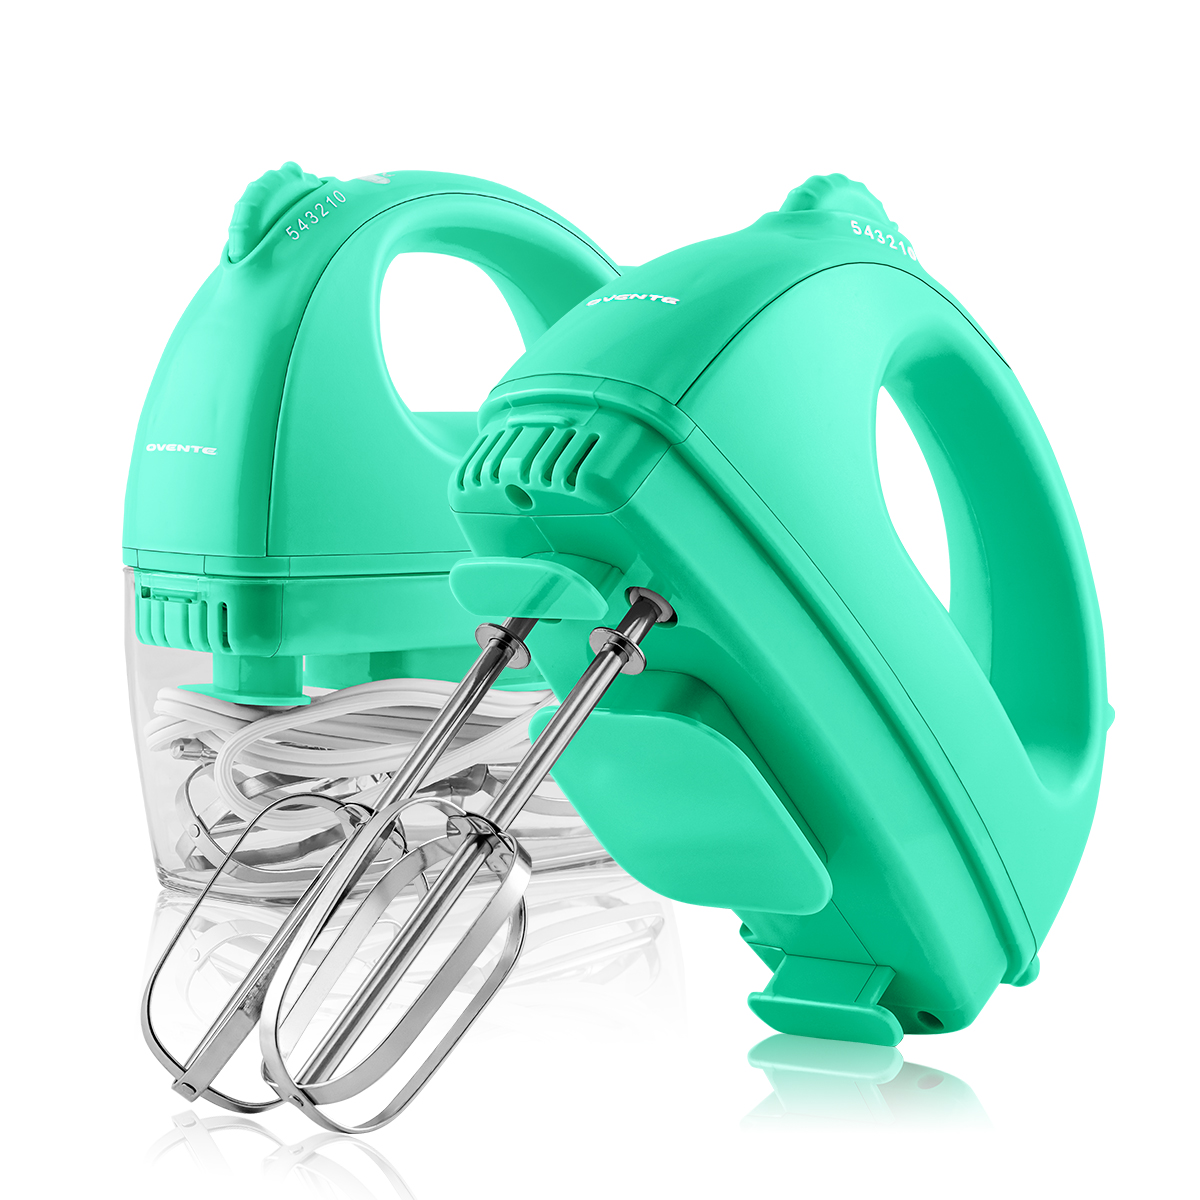 Ovente Portable Electric Hand Mixer 5 Speed Mixing 150W Powerful